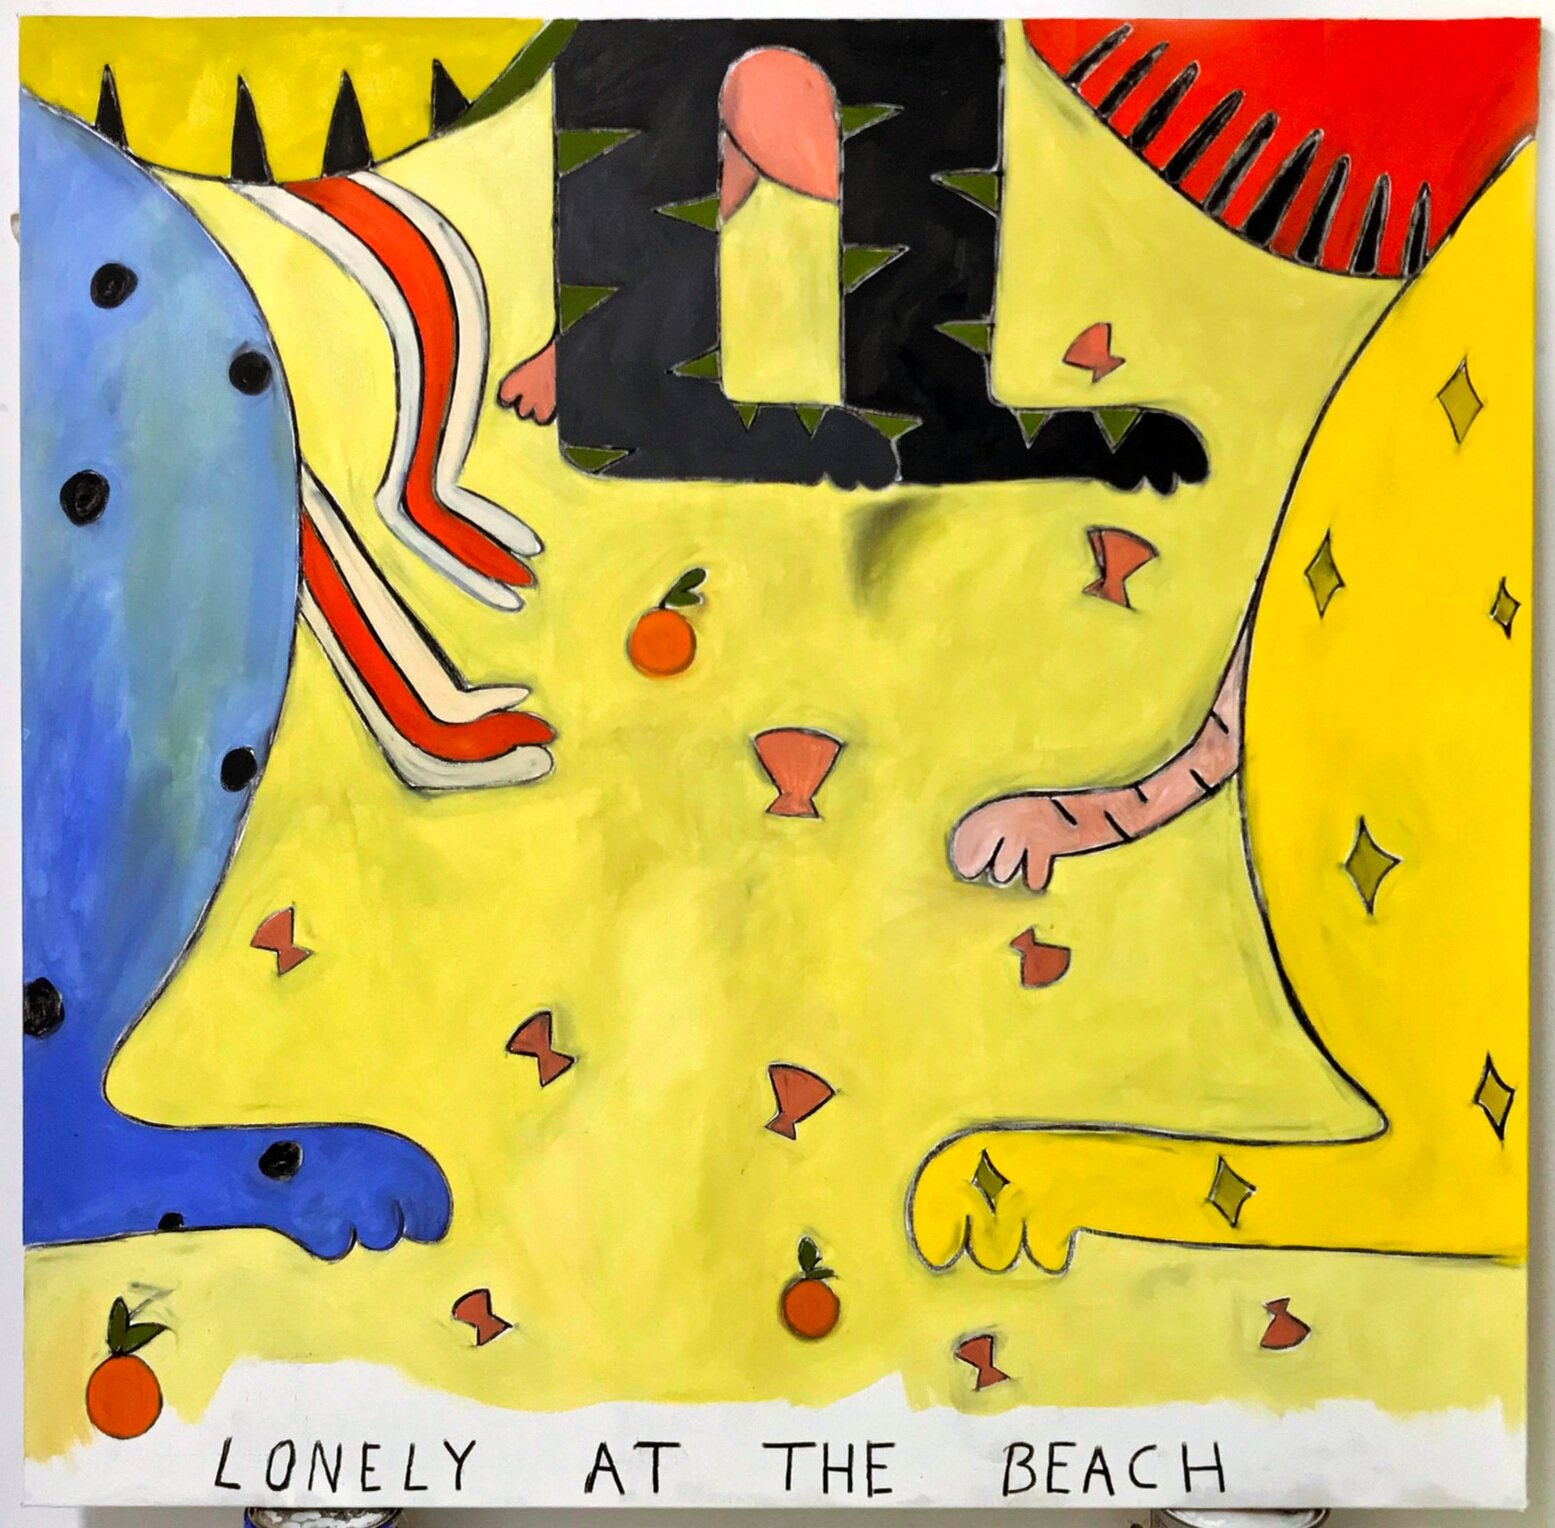 "Lonely at the Beach"